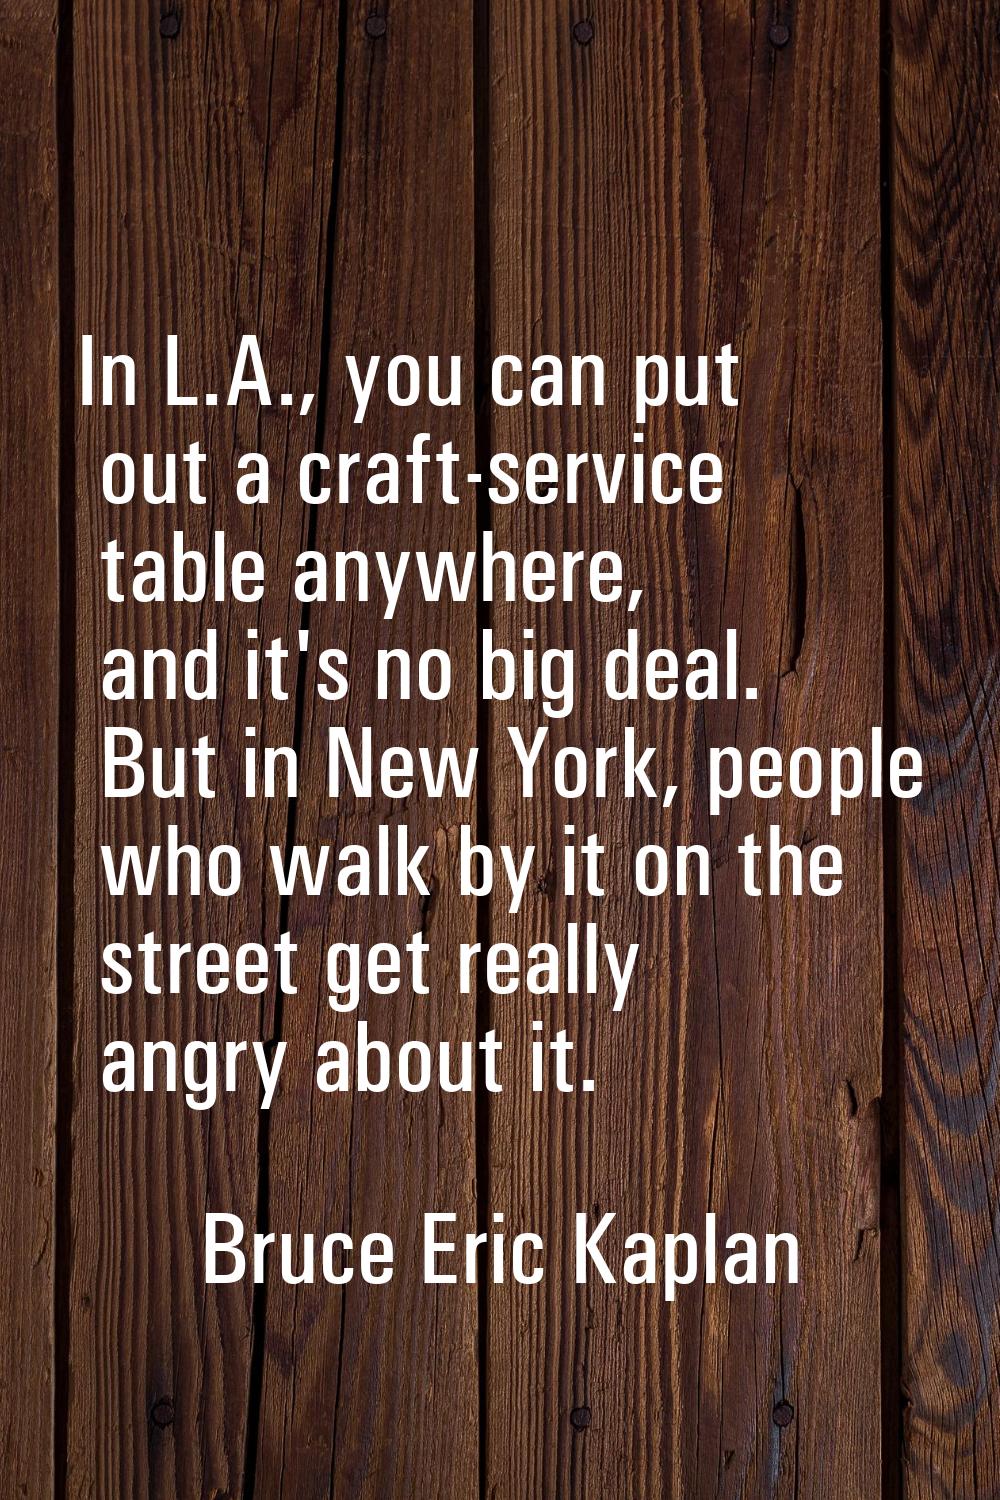 In L.A., you can put out a craft-service table anywhere, and it's no big deal. But in New York, peo